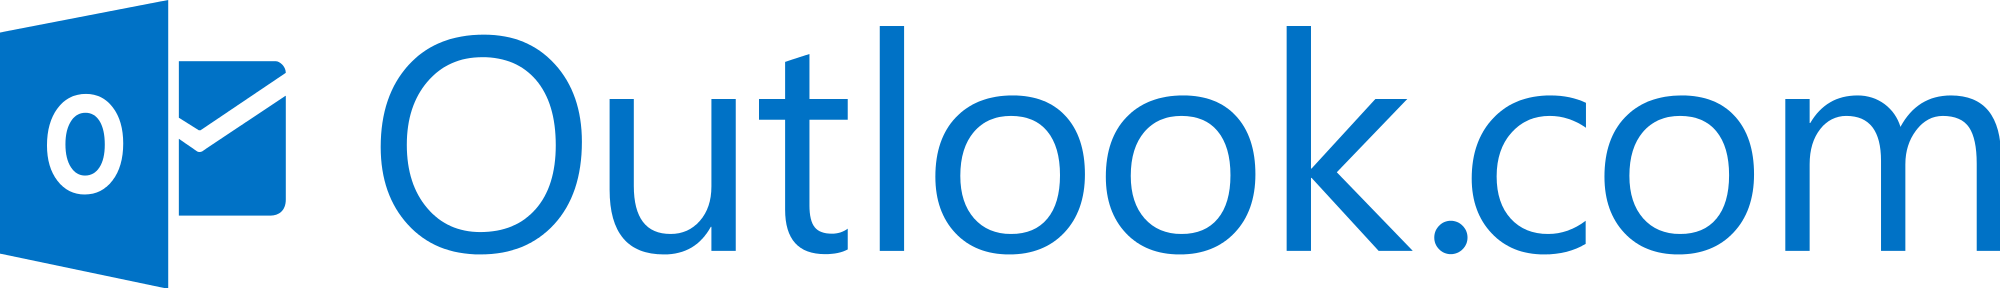 Outlook Transparent Logo - File:Outlook.com logo and wordmark.svg - Wikimedia Commons